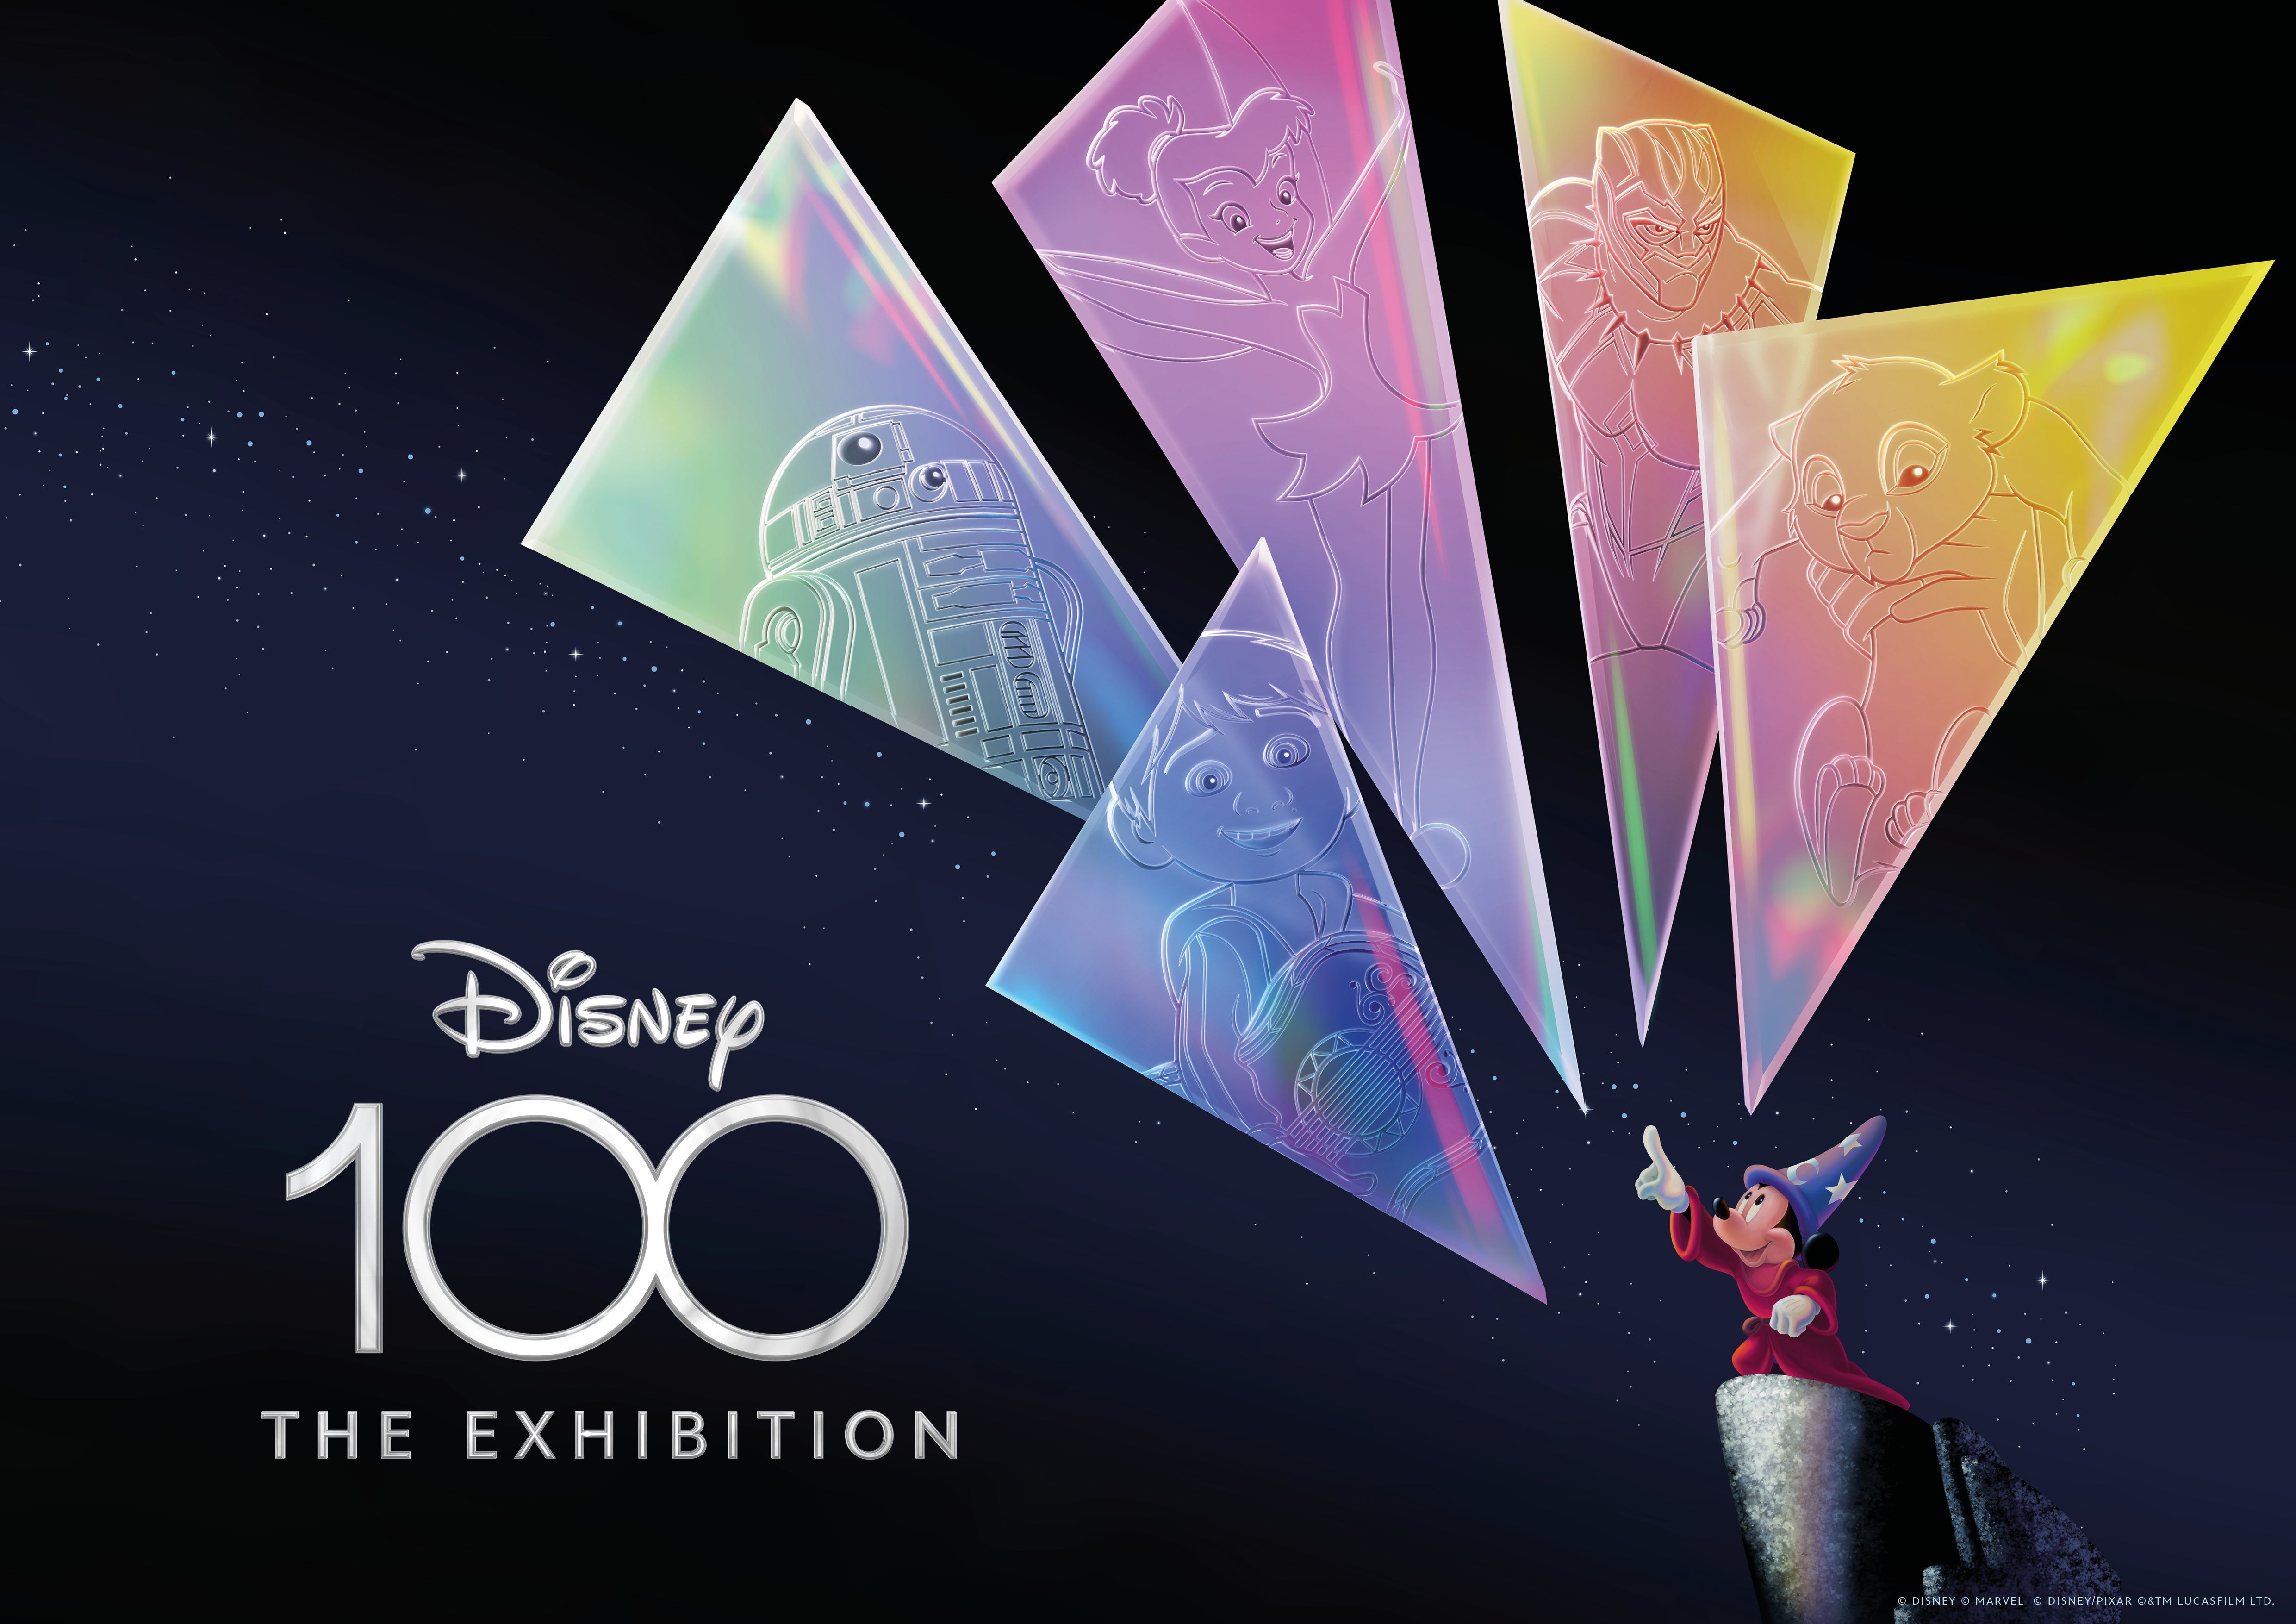 Disney100: The Exhibition' to make its world premiere at the